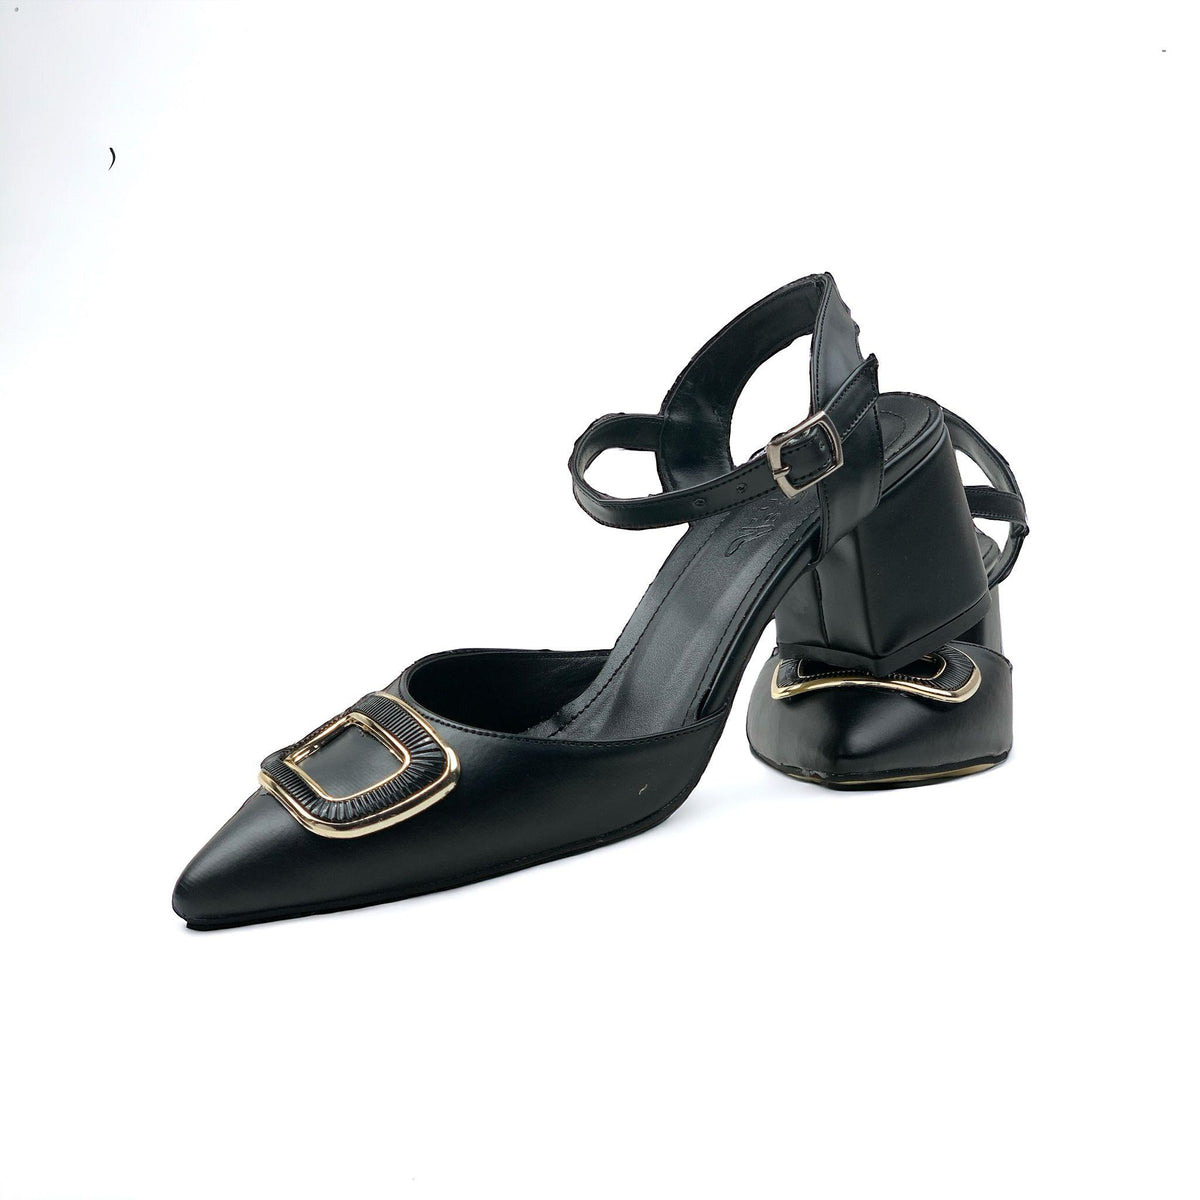 Women's Saree Black Ankle Strap Heeled Shoes Ballerinas - STREETMODE™